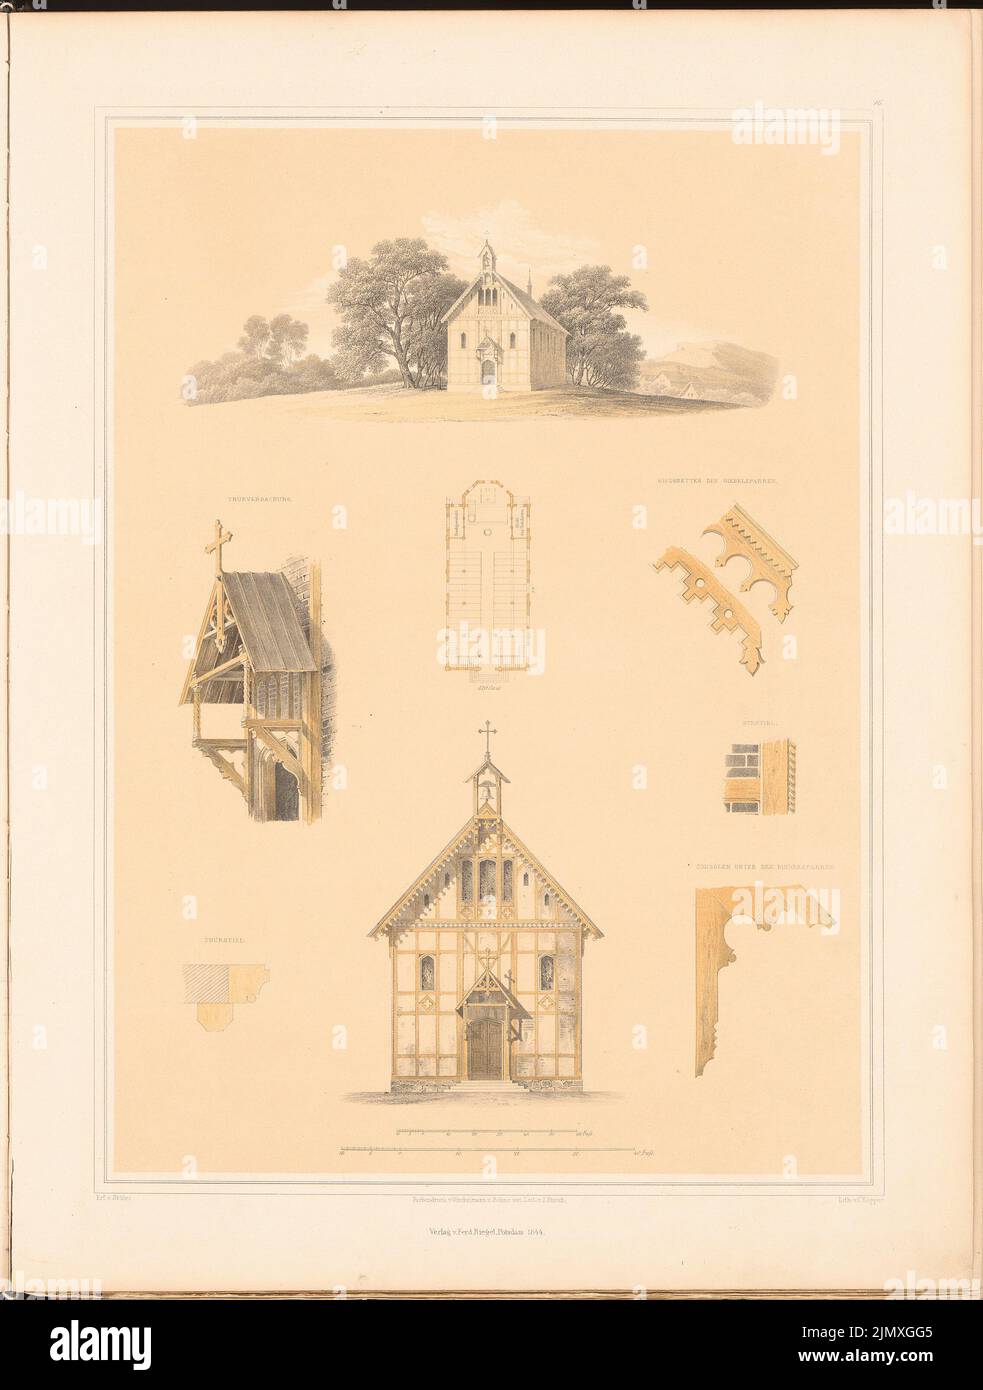 Stüler August (1800-1865), country church in wooden building for 320 people. (From: designs on churches, parish and school houses, ed. From the royal Prussian superstructure deputation, 1845-1855) (1845-1845): Perspective view, floor plan, view from the front, five details. Lithograph colored on paper, 57 x 43.1 cm (including scan edges) Stüler Friedrich August  (1800-1865): Landkirche in Holzbau für 320 Personen. (Aus: Entwürfe zu Kirchen, Pfarr- und Schulhäusern, hrsg. von der Kgl. Preuß. Oberbaudeputation, 1845-1855) Stock Photo